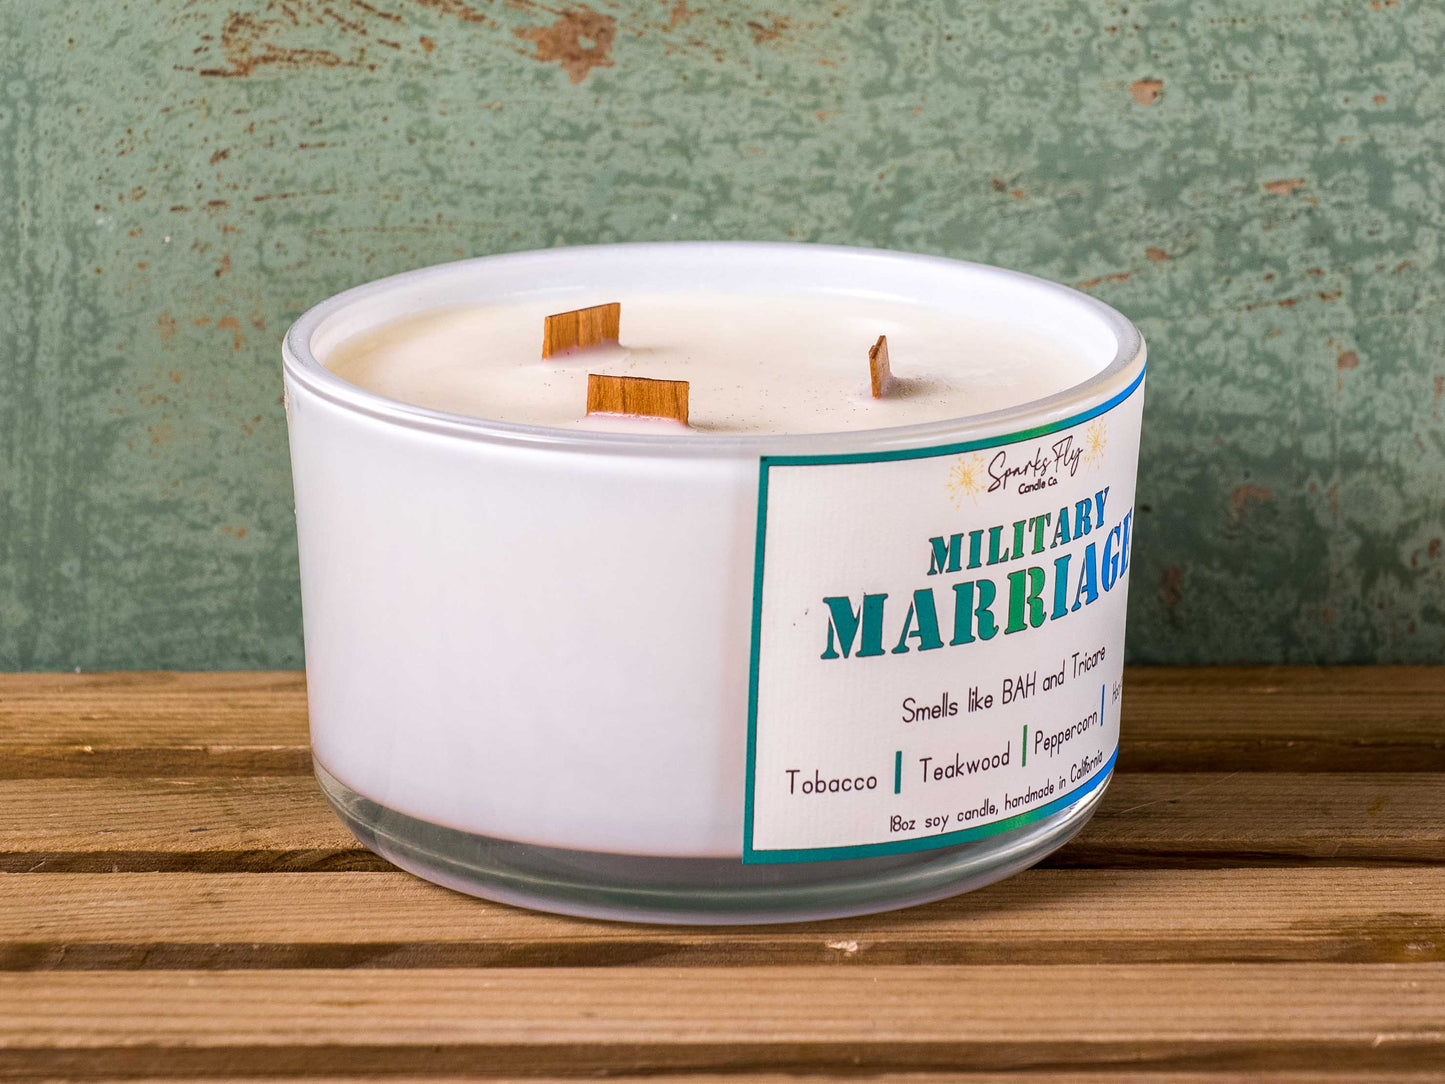 Military Marriage Candle - The comforting aroma of BAH benefits & Tricare security